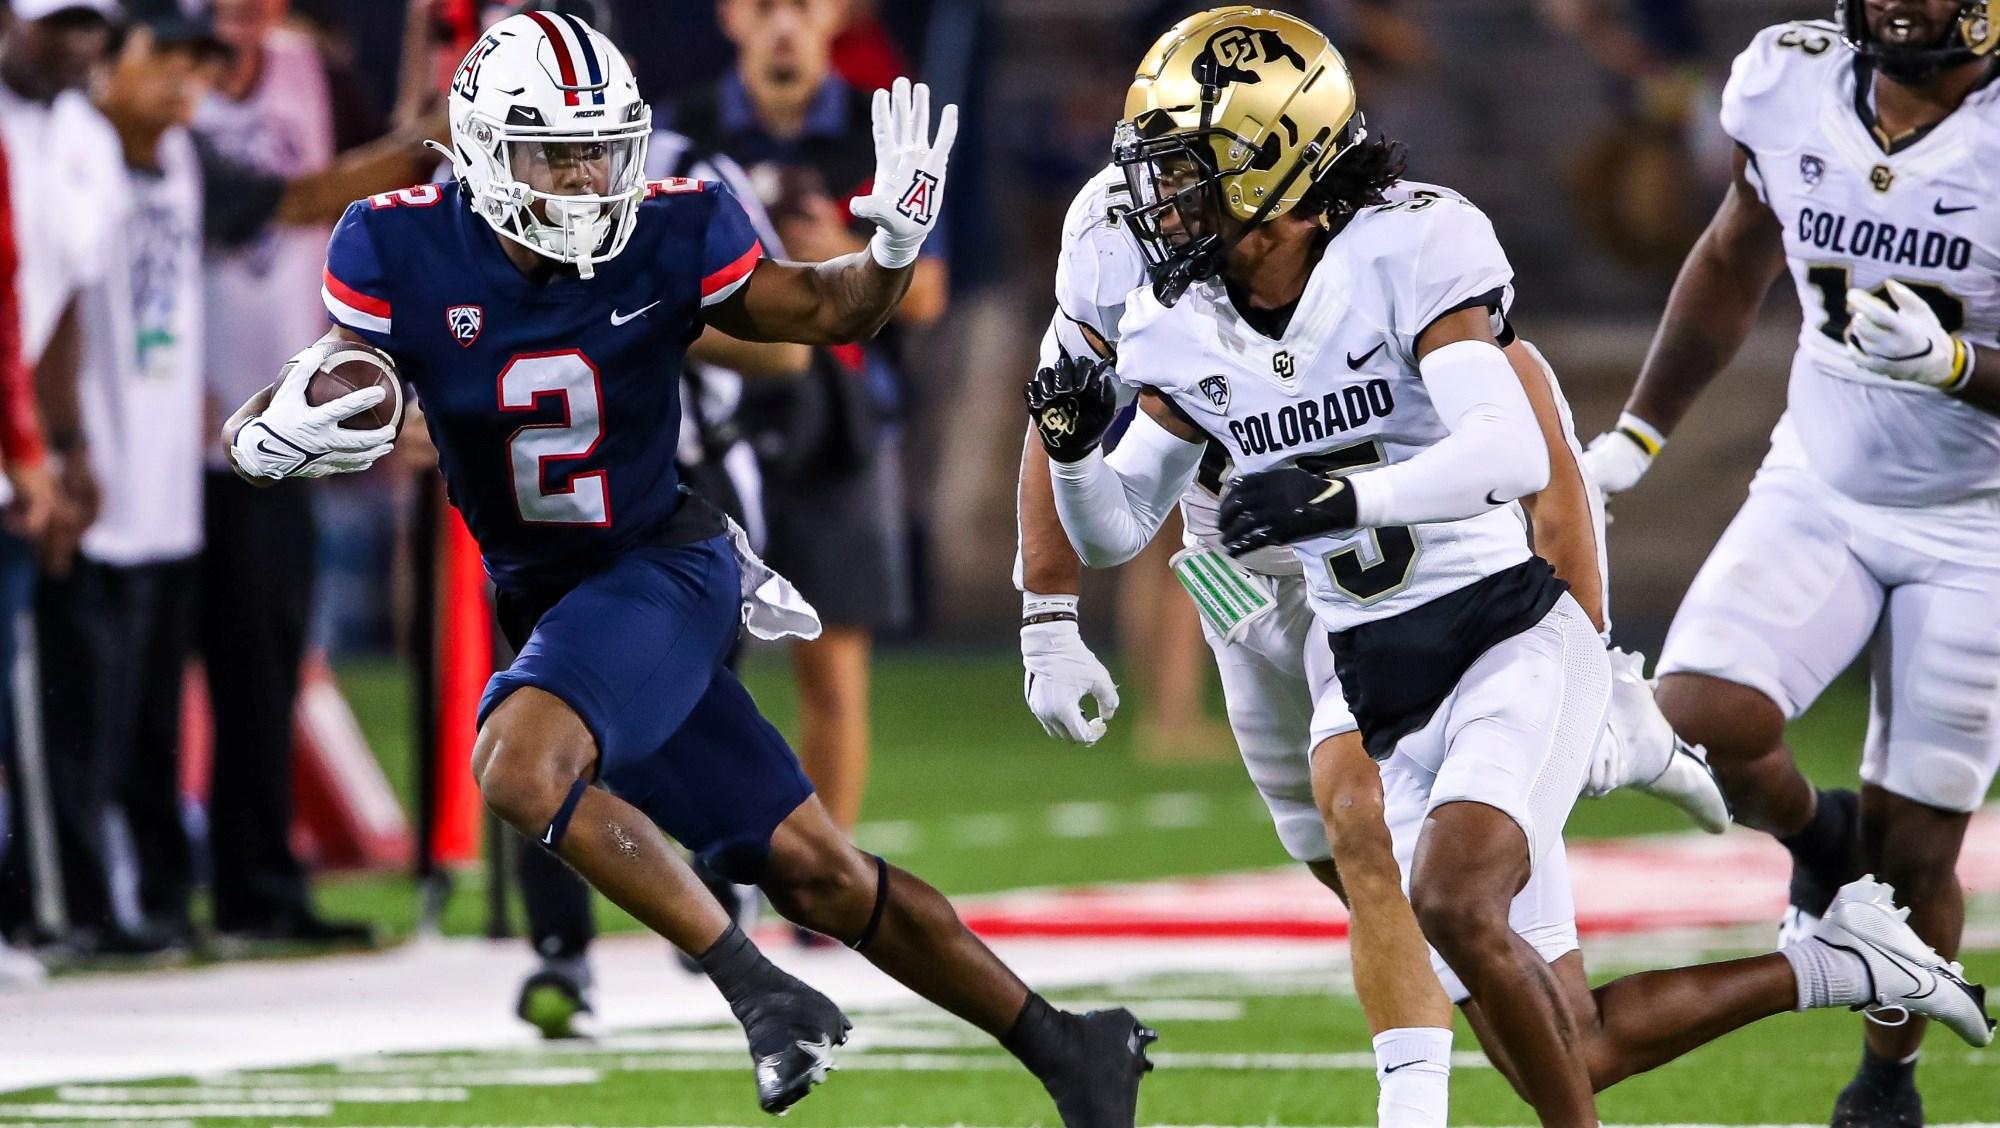 NFL News: These Hidden Gems Of The 2024 NFL Draft Can Be The Next Big Names In NFL – Aidan O’Connell, Puka Nacua And More